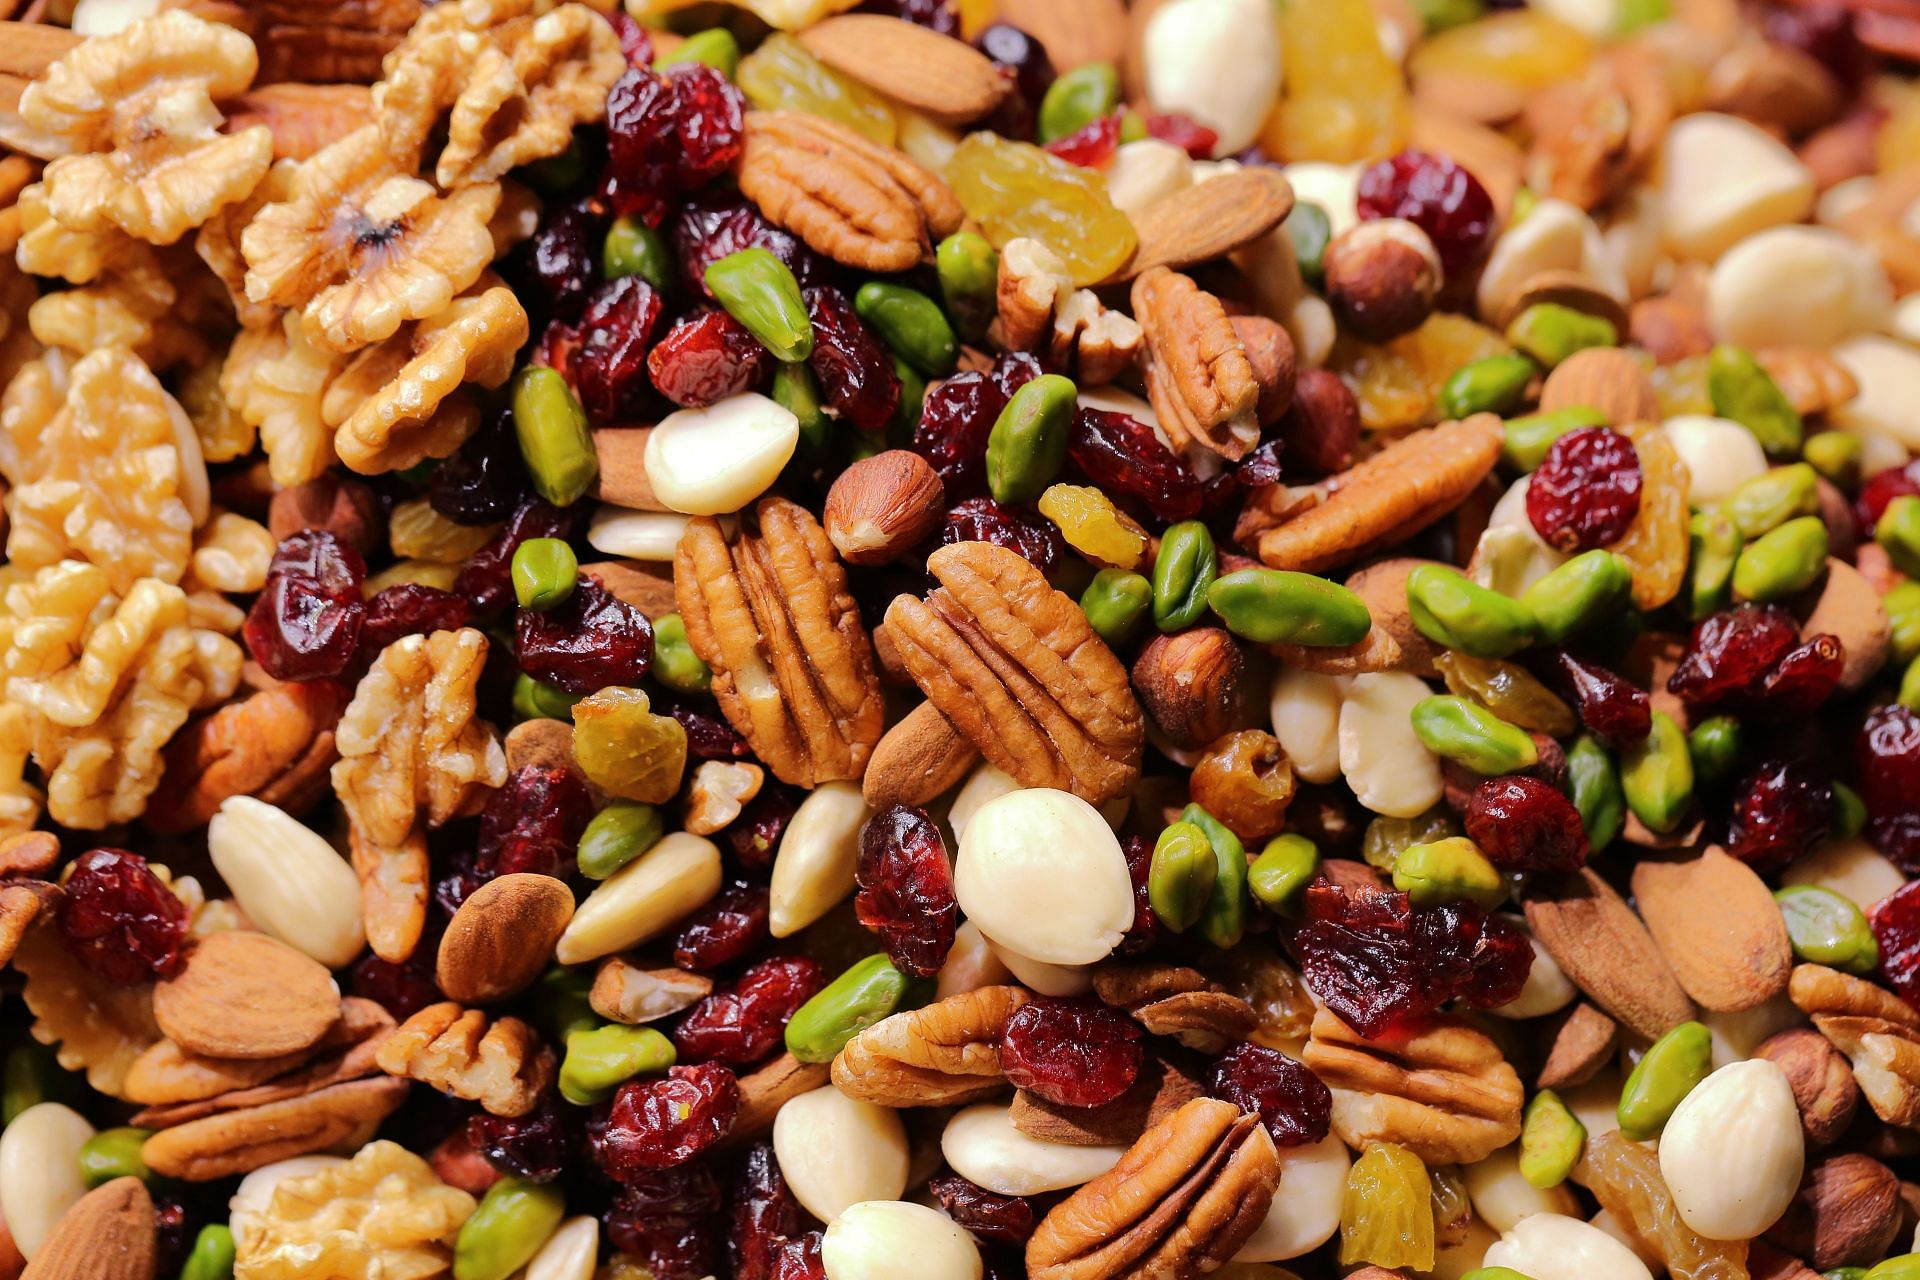 Nuts can be considered among the best protein foods for weight loss (Image via Unsplash/Makshim Shutov)